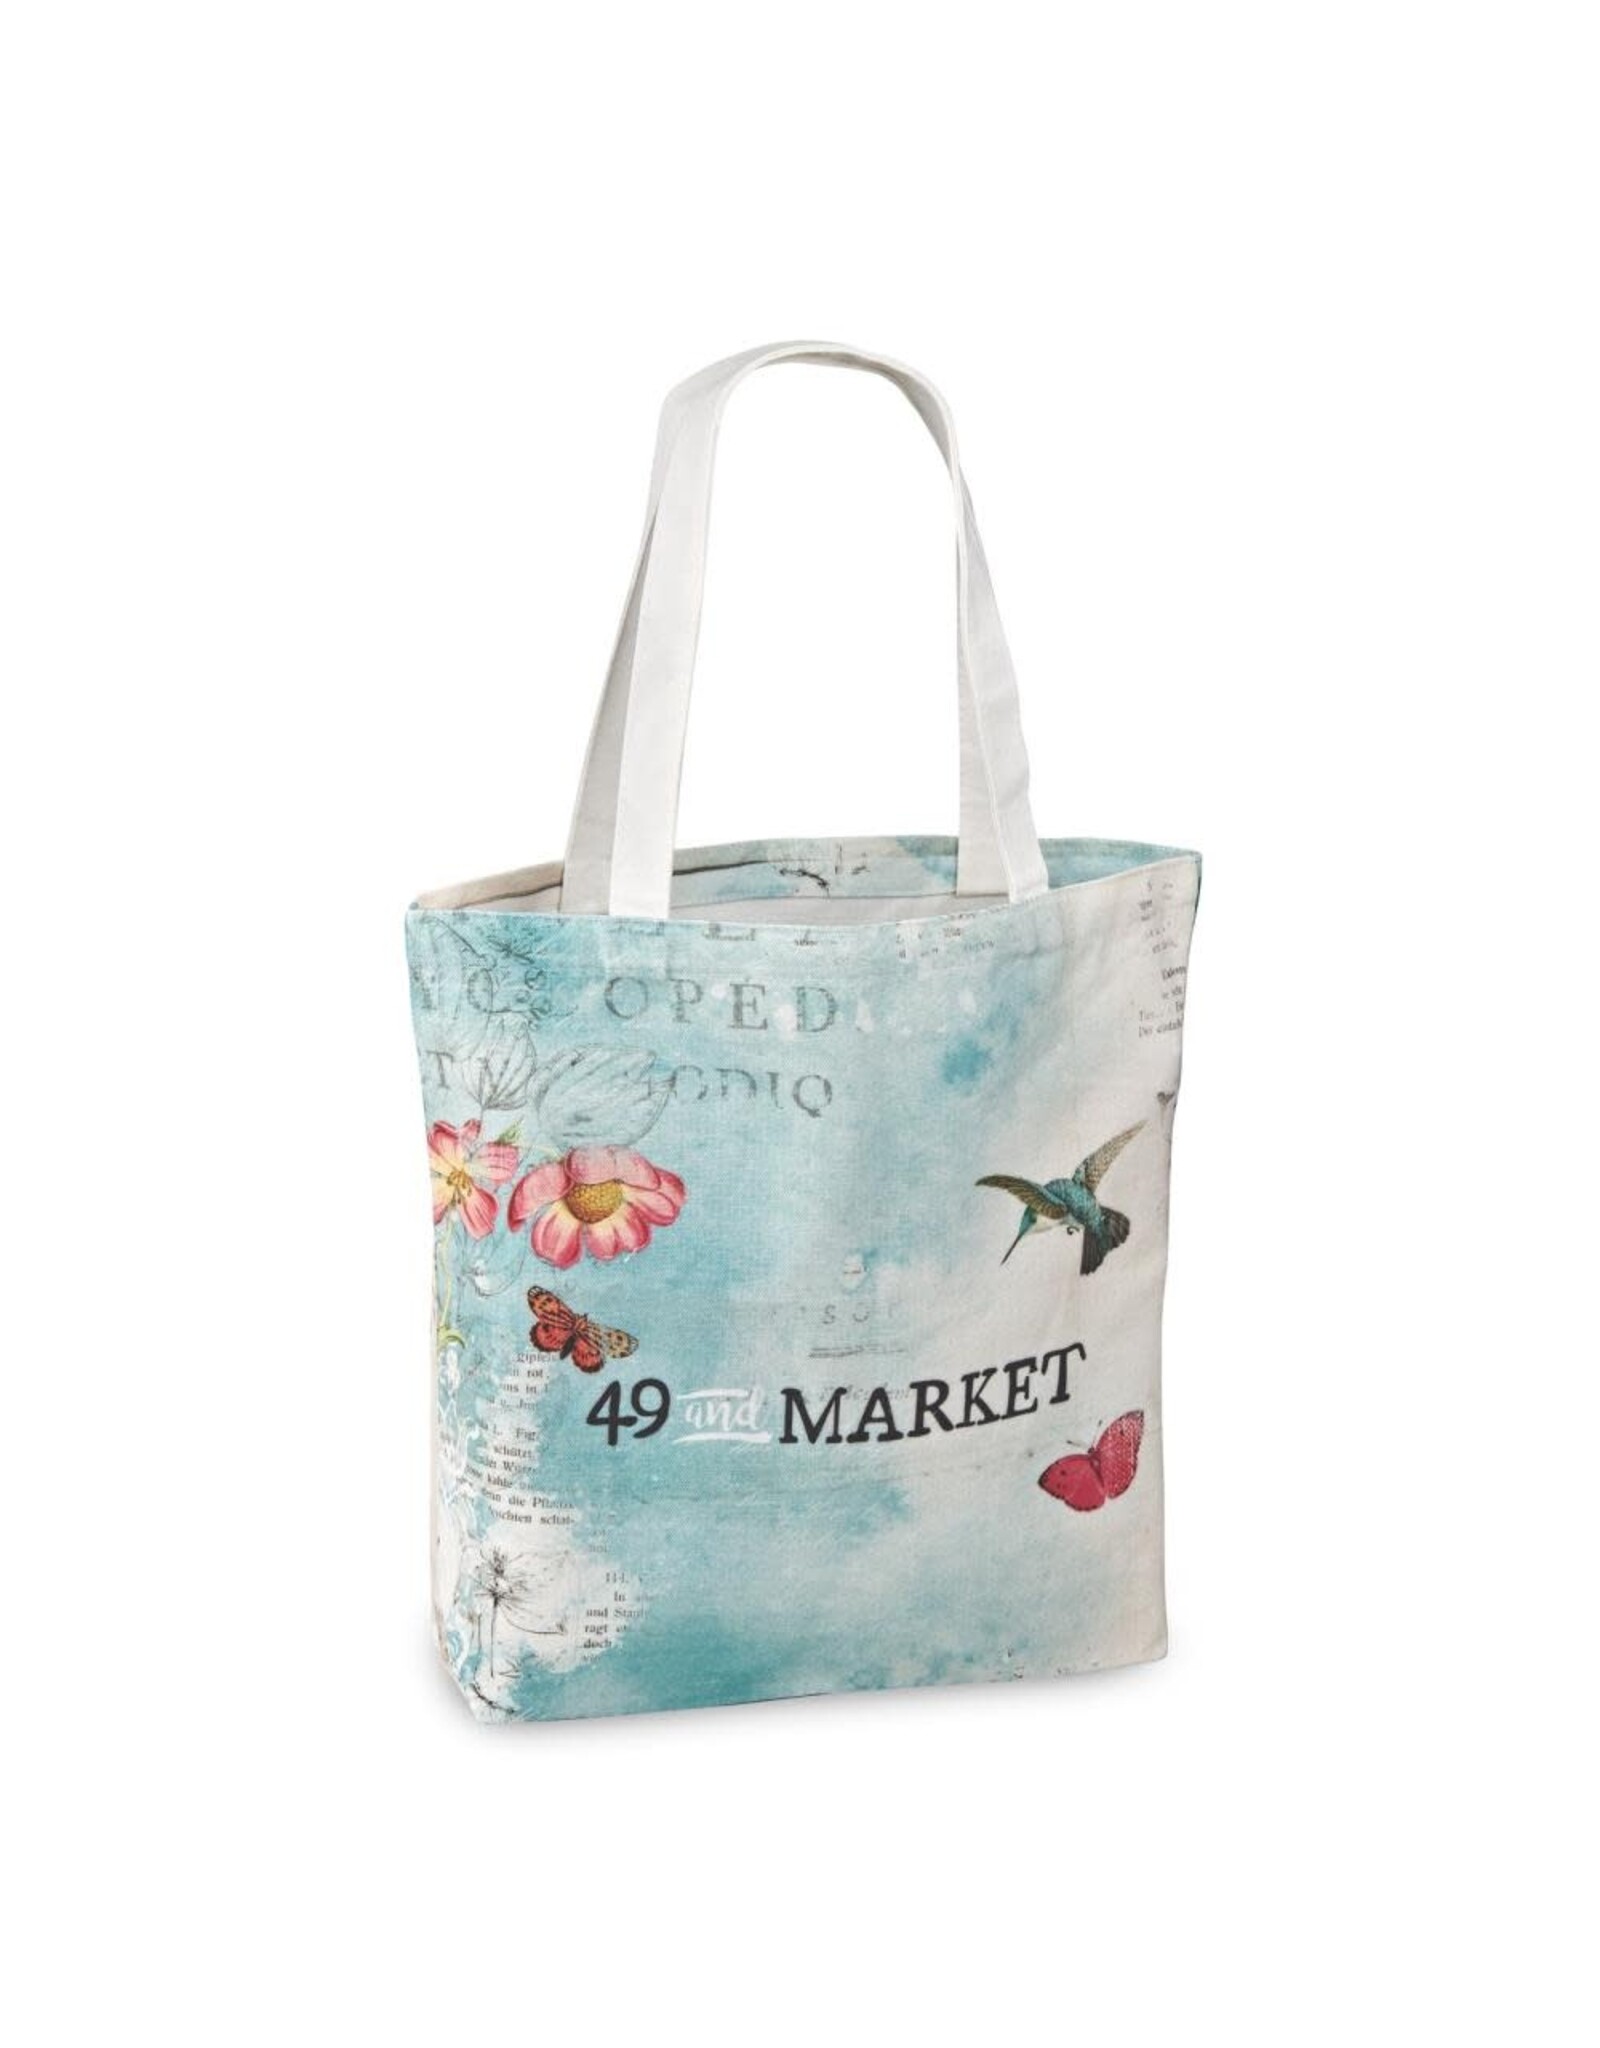 49 AND MARKET 49 AND MARKET KALEIDOSCOPE (LIMITED EDITION) TOTE BAG